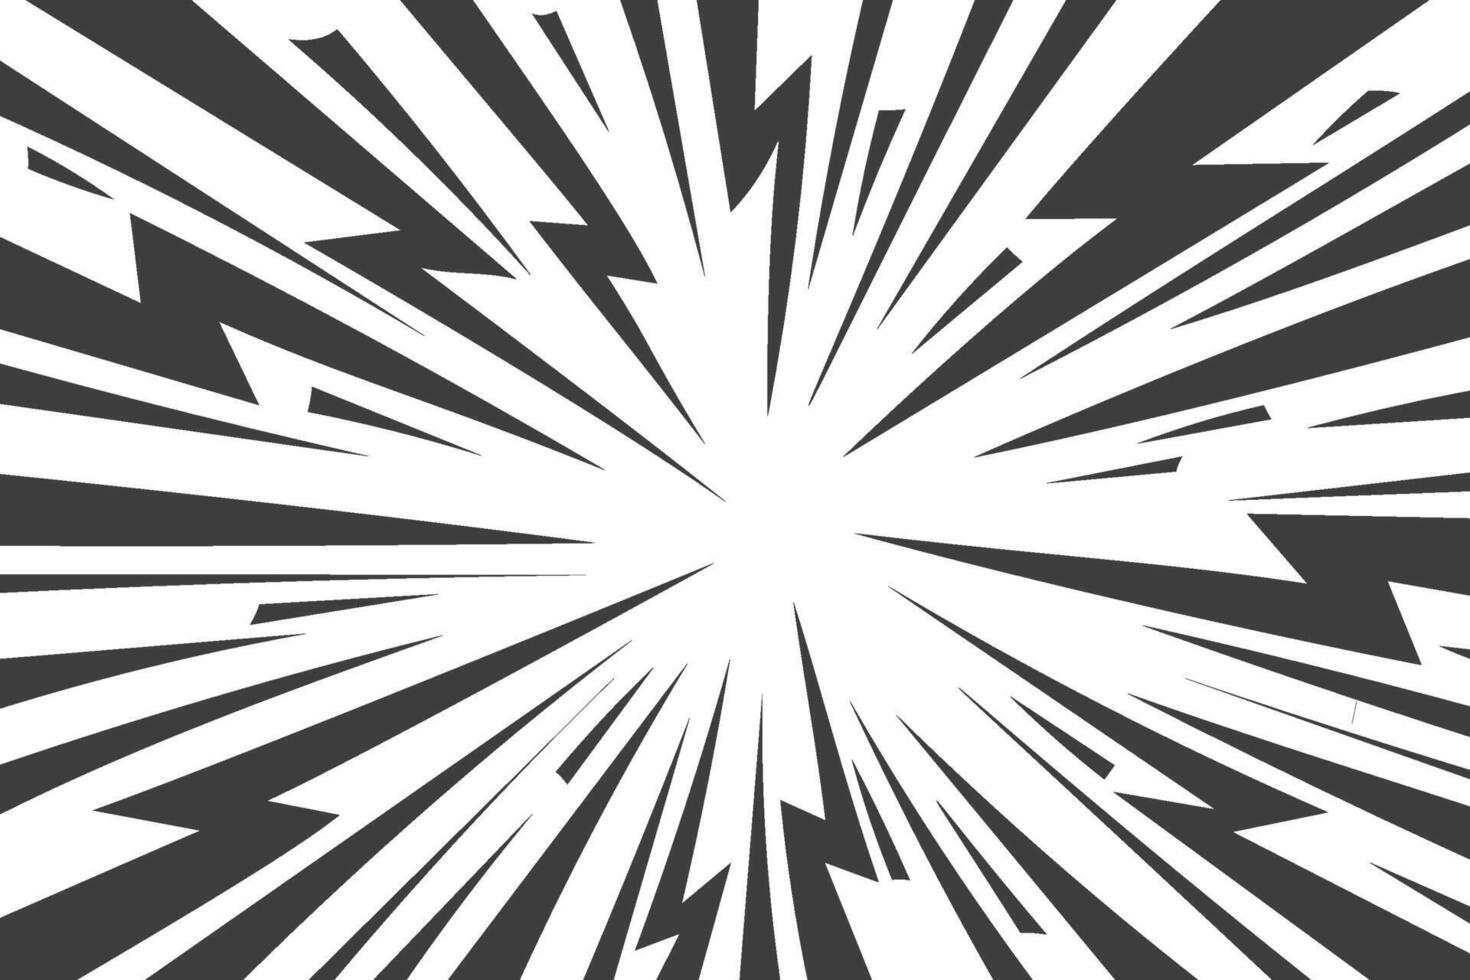 Speed lines in frame for manga comics book. Radial motion background with flash and lightning. Monochrome explosion and flash glow. Concentric textured illustration vector